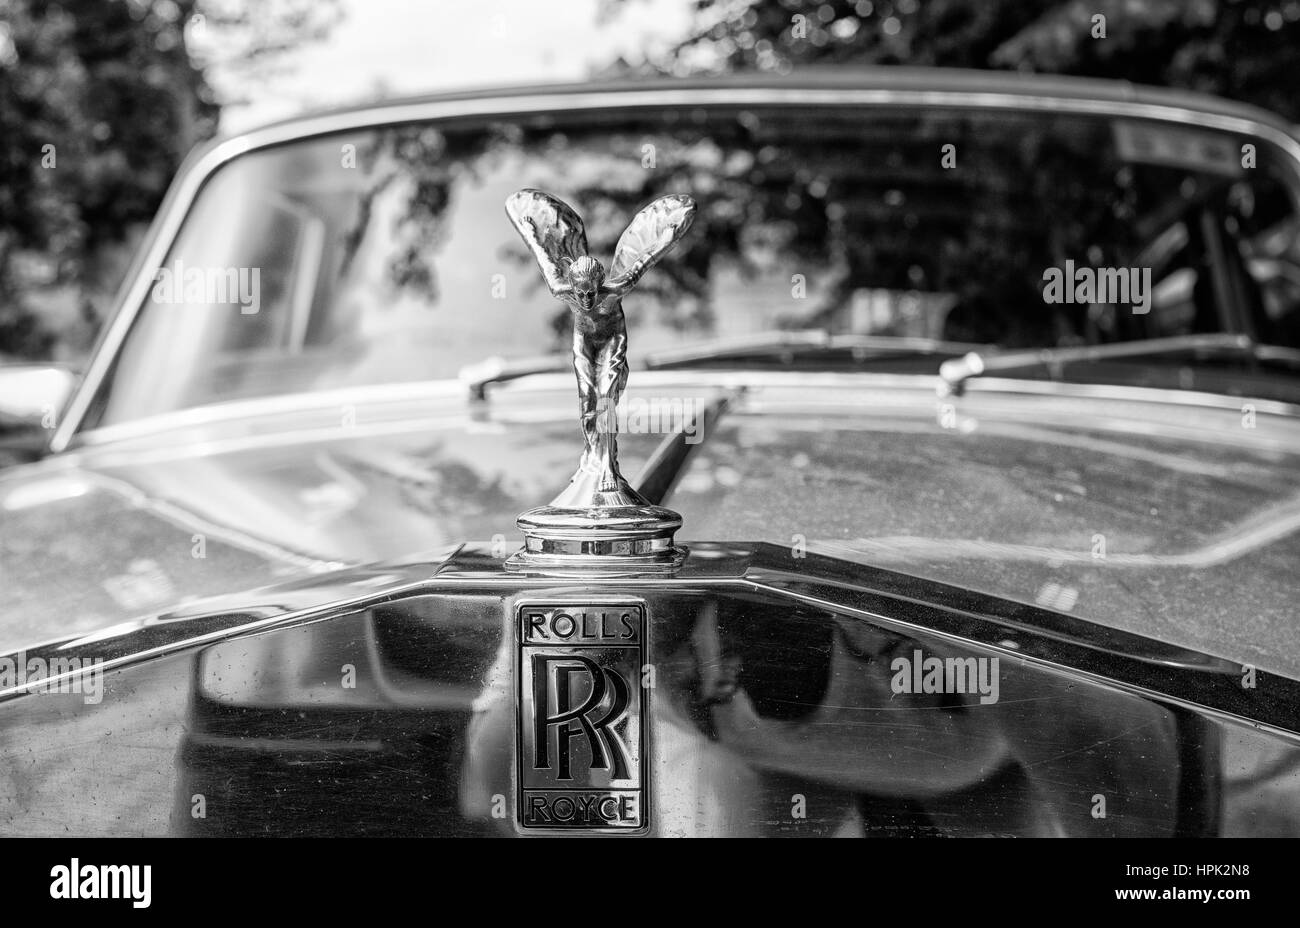 Rolls Royce grille and Spirit of Ecstasy mascot Stock Photo